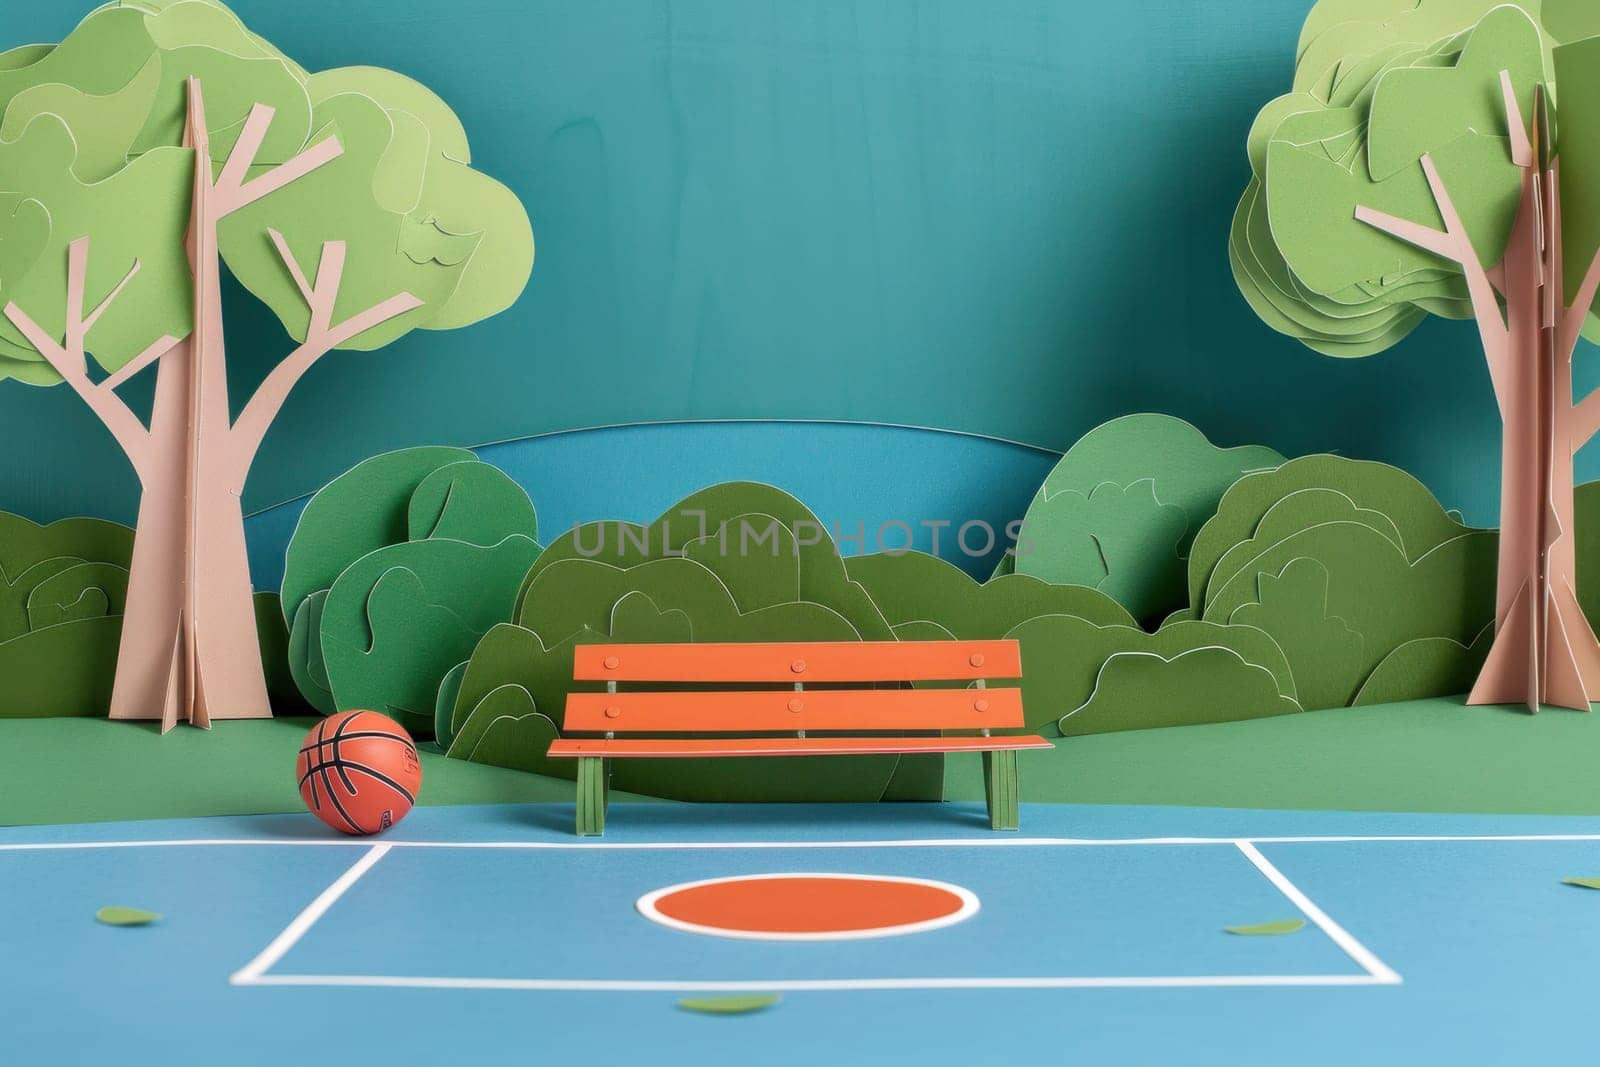 Basketball court landscape with trees, bench, and basketball in a park setting with relaxing vibes